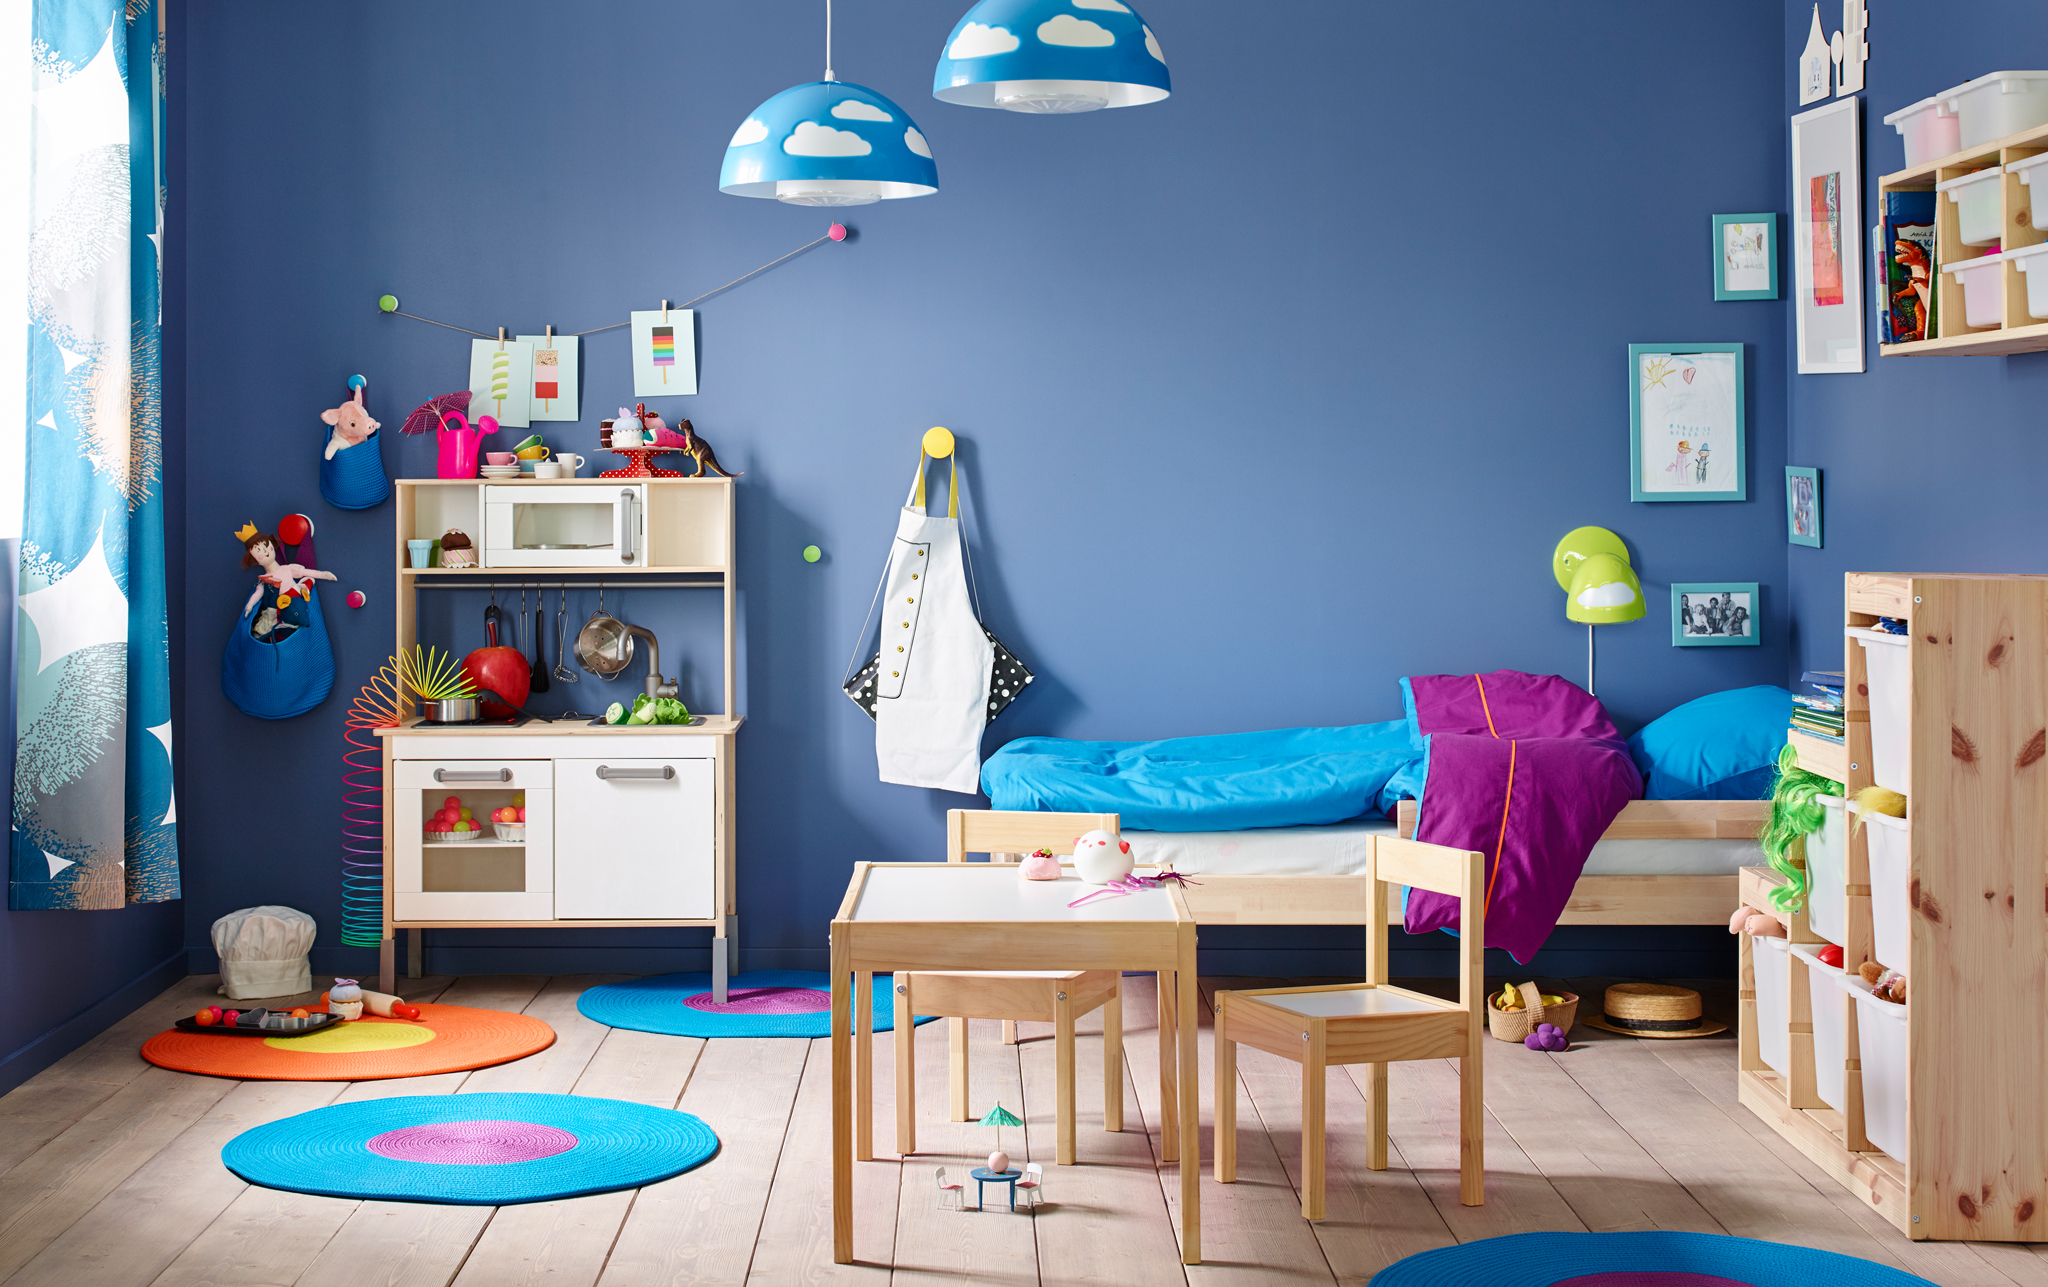 childrens bedroom furniture for small rooms bedroom furniture beech children small room wooden childrens bedroom  furniture RYBQFKG